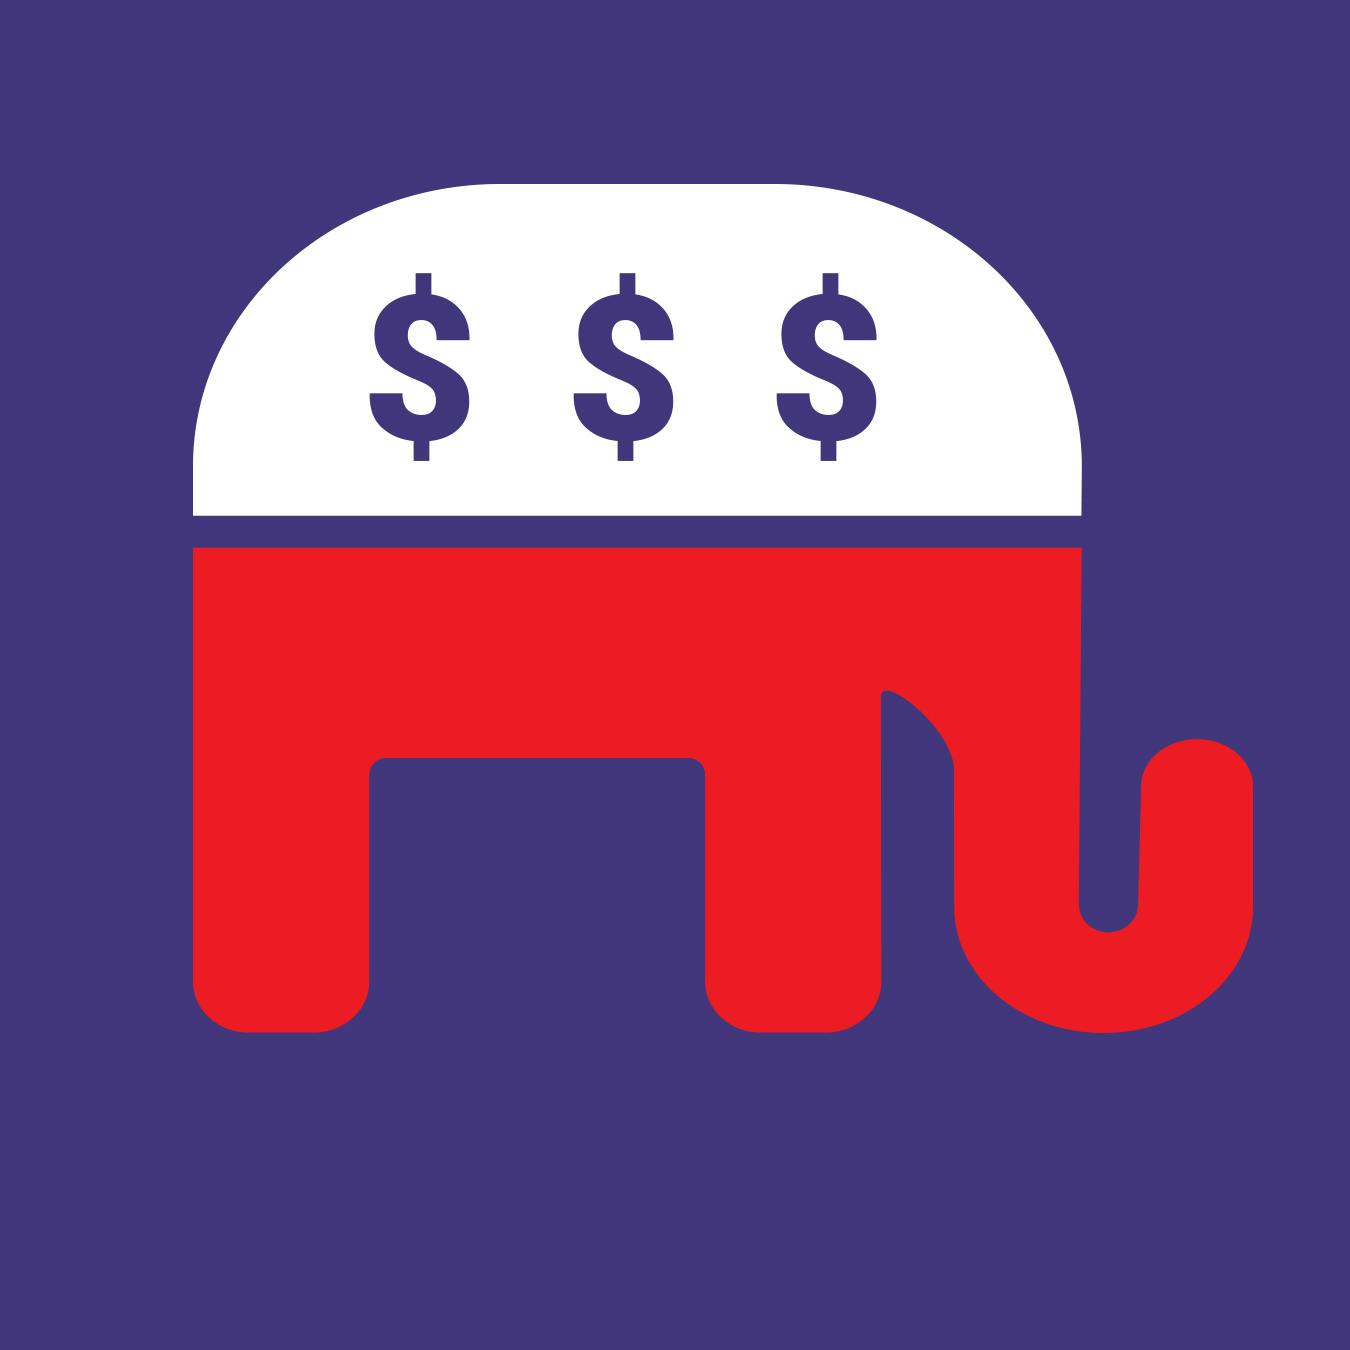 Is the Republican Party’s Refusal to Raise Taxes Fiscally Irresponsible?